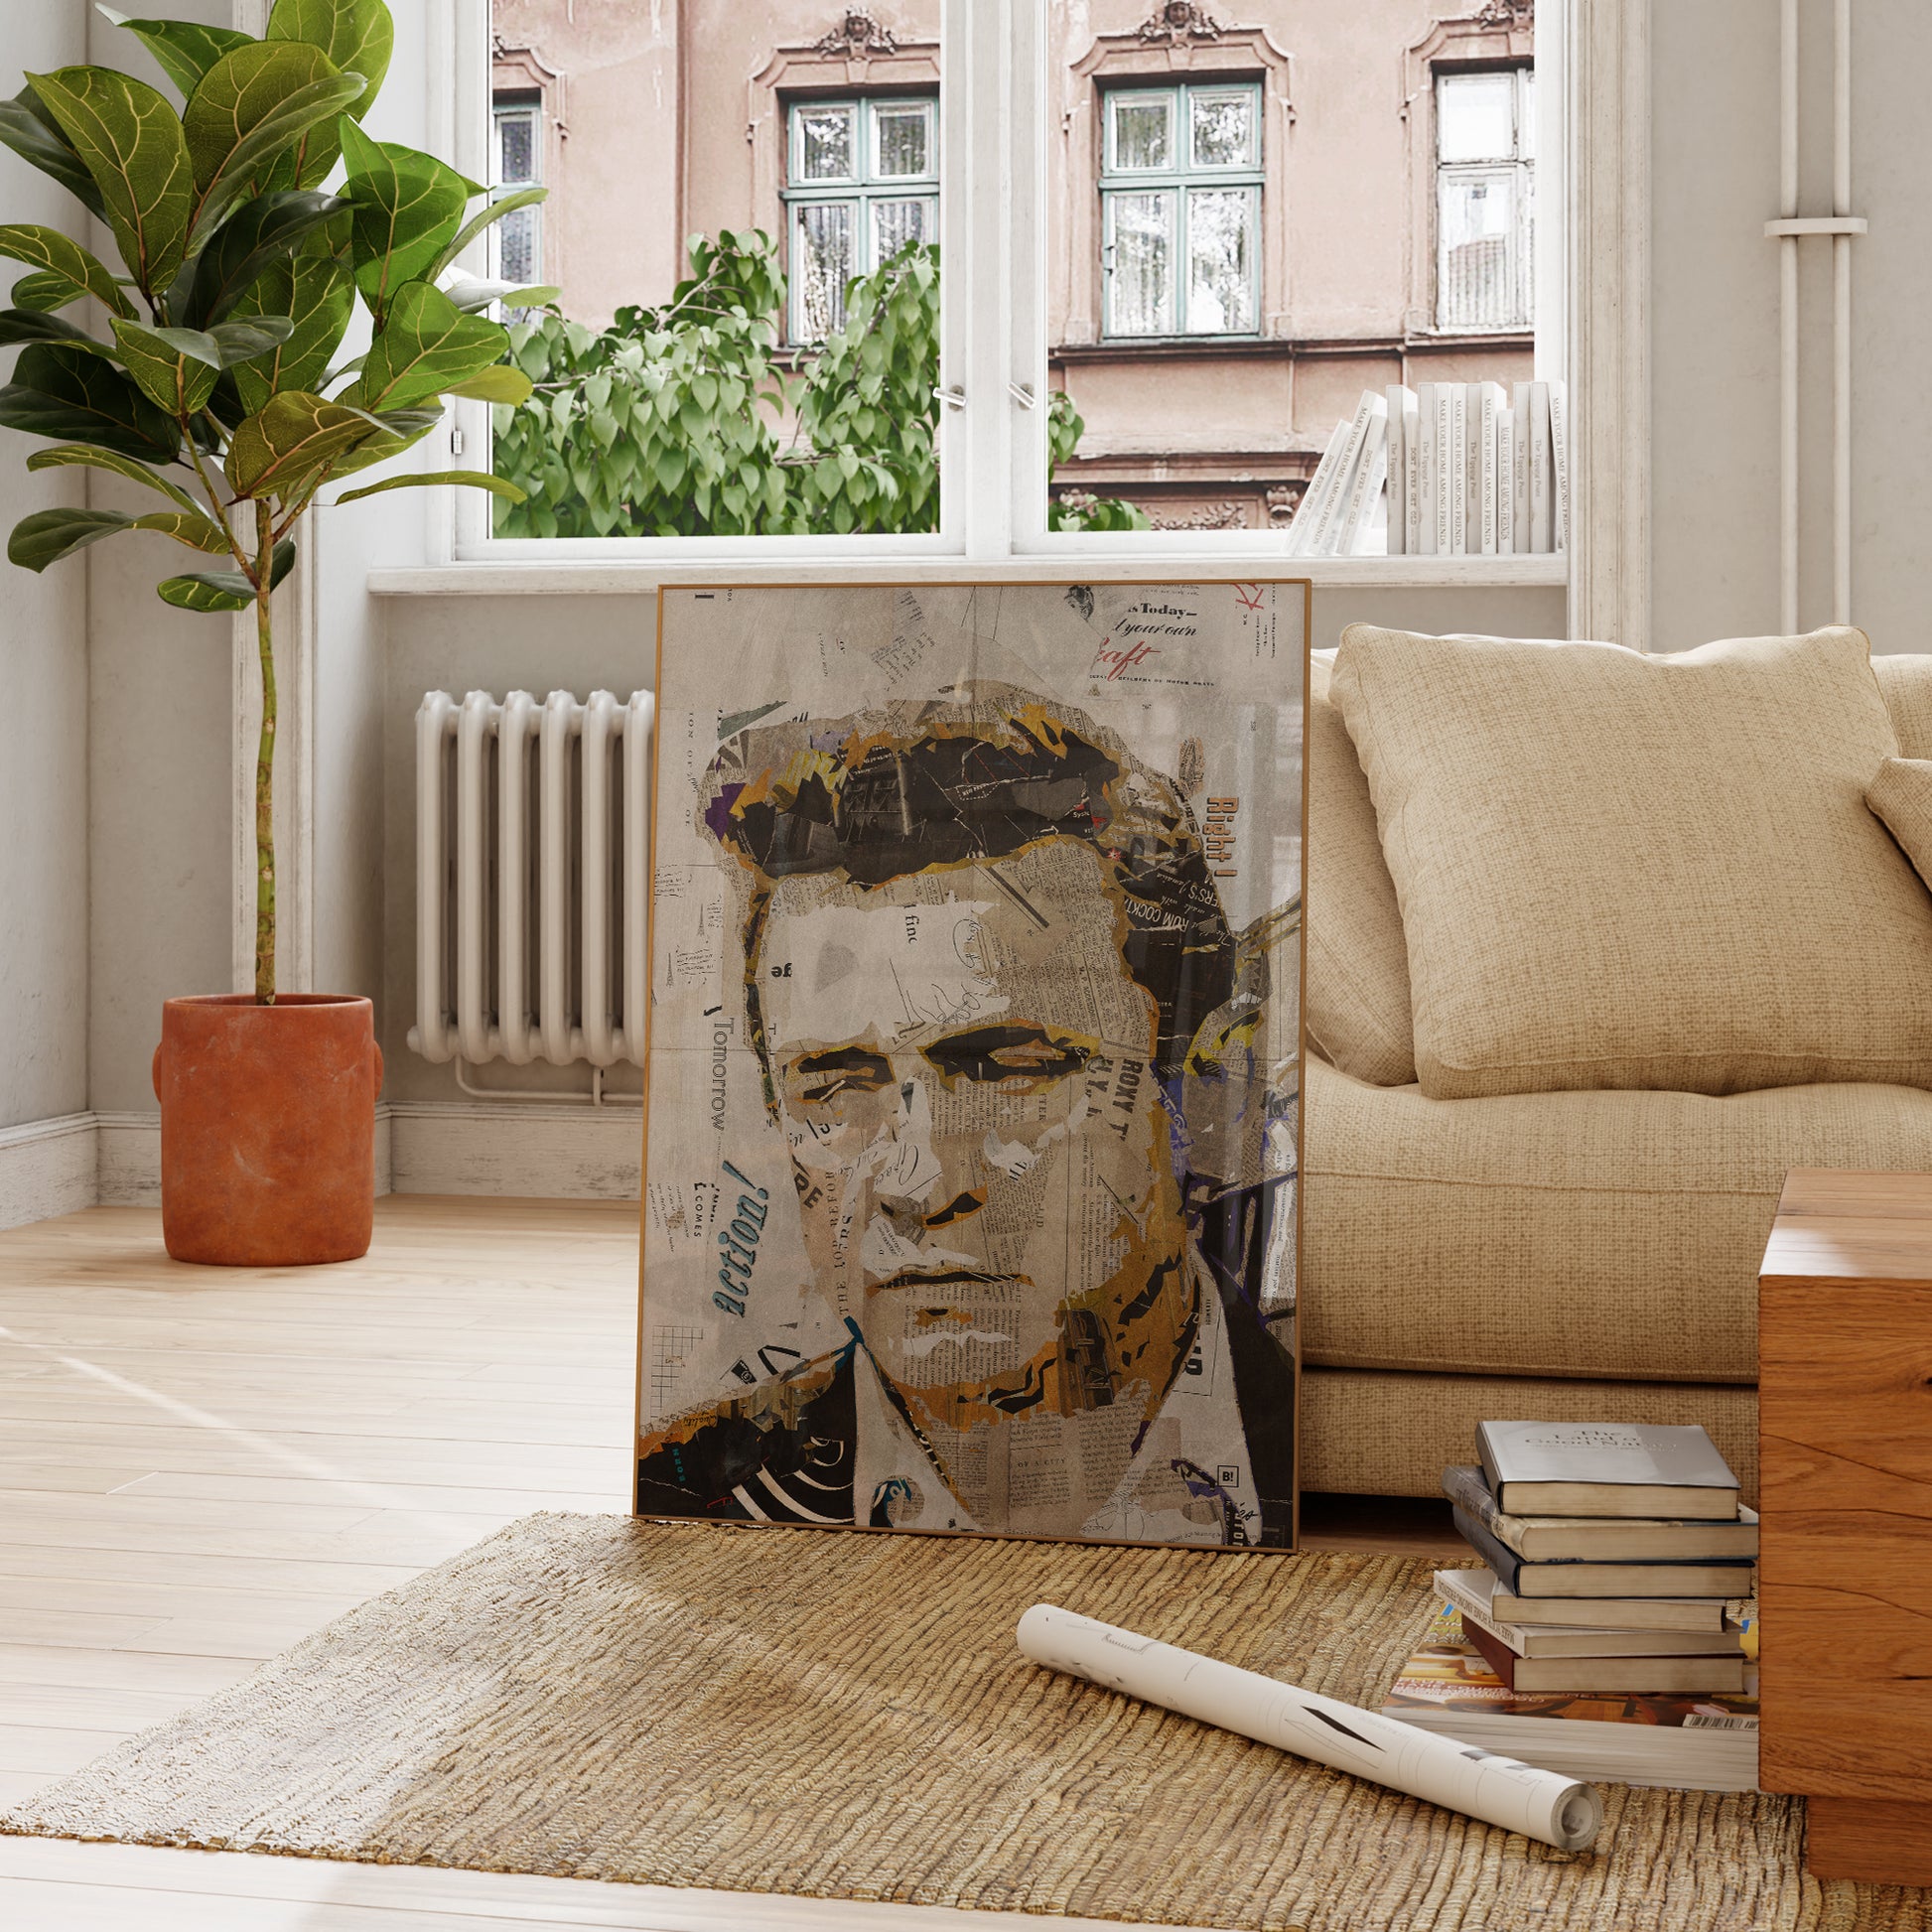 Be inspired by our iconic collage portrait art print of Johnny Cash. This artwork was printed using the giclée process on archival acid-free paper and is presented in a French living room, capturing its timeless beauty in every detail.